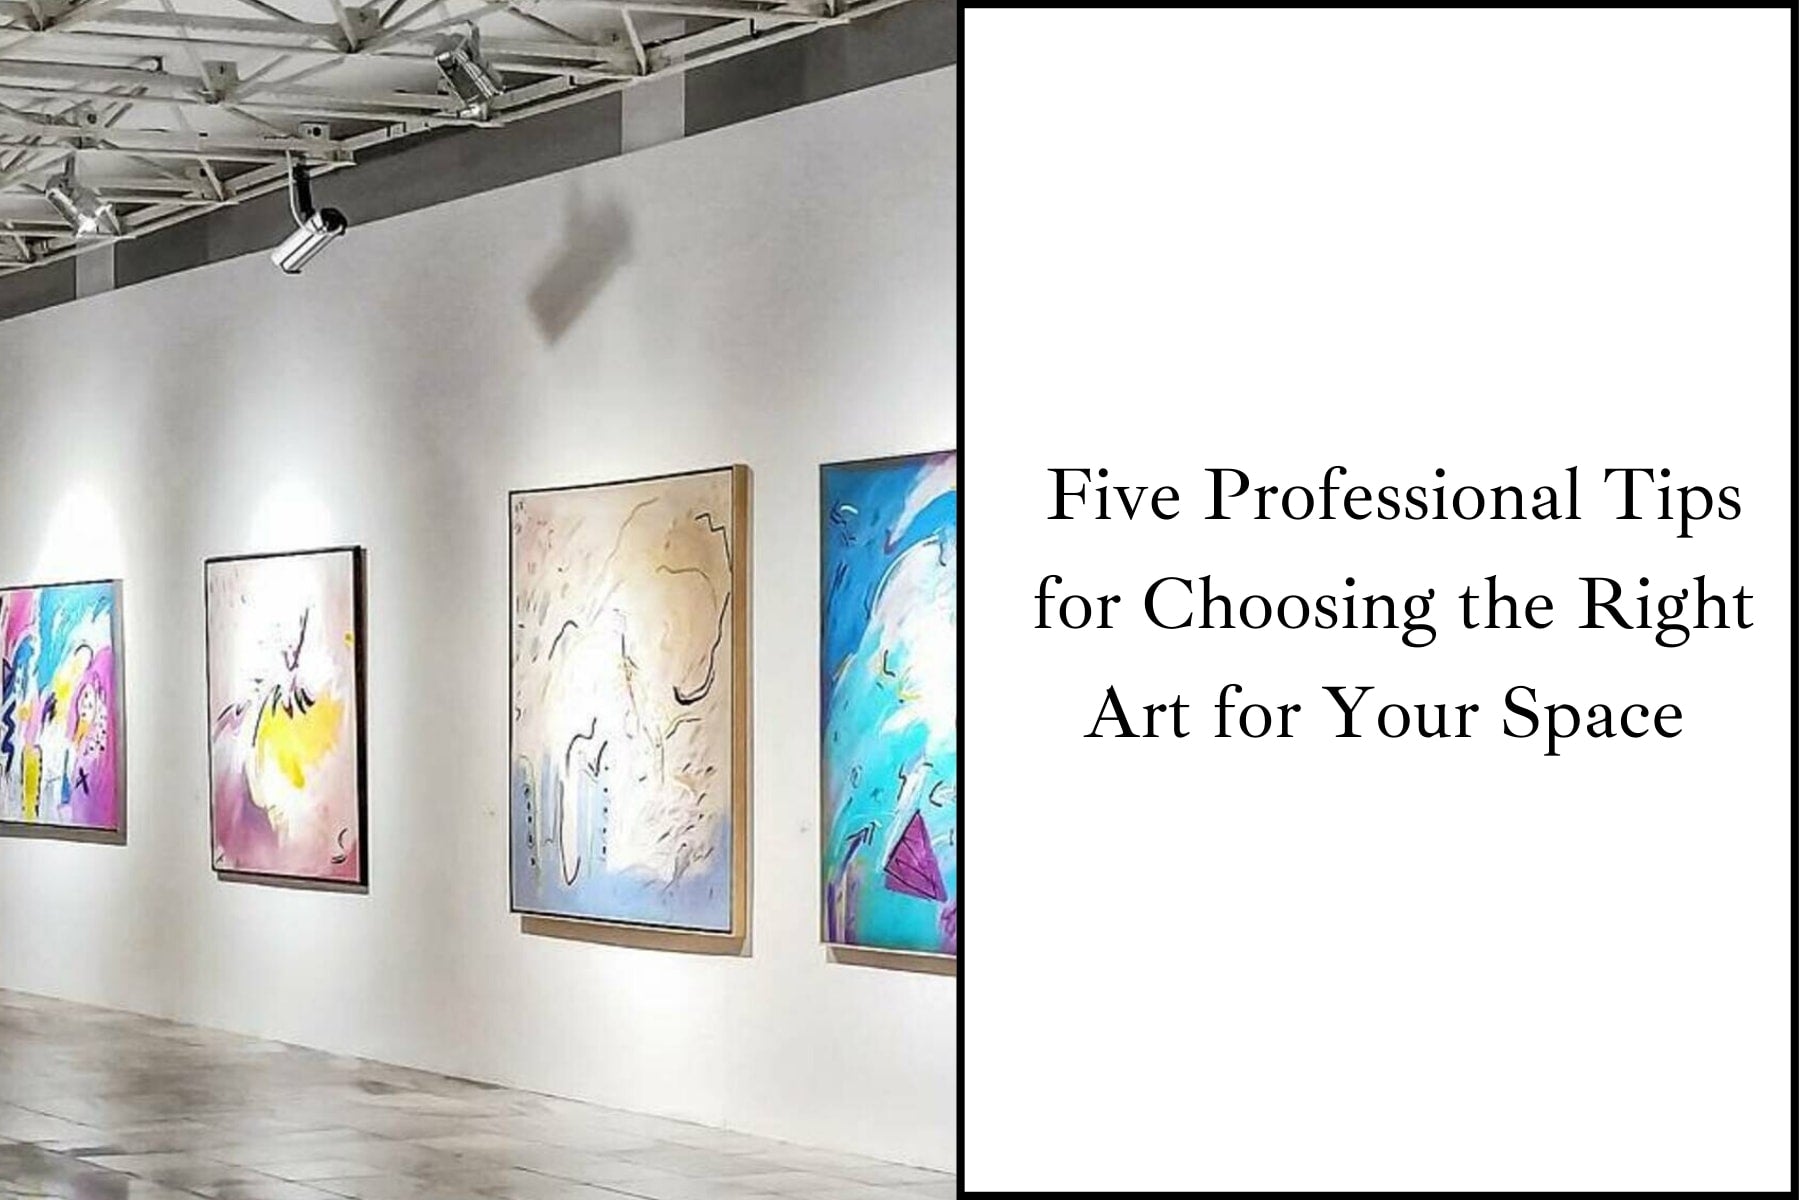 Five Professional Tips for Choosing the Right Art for Your Space